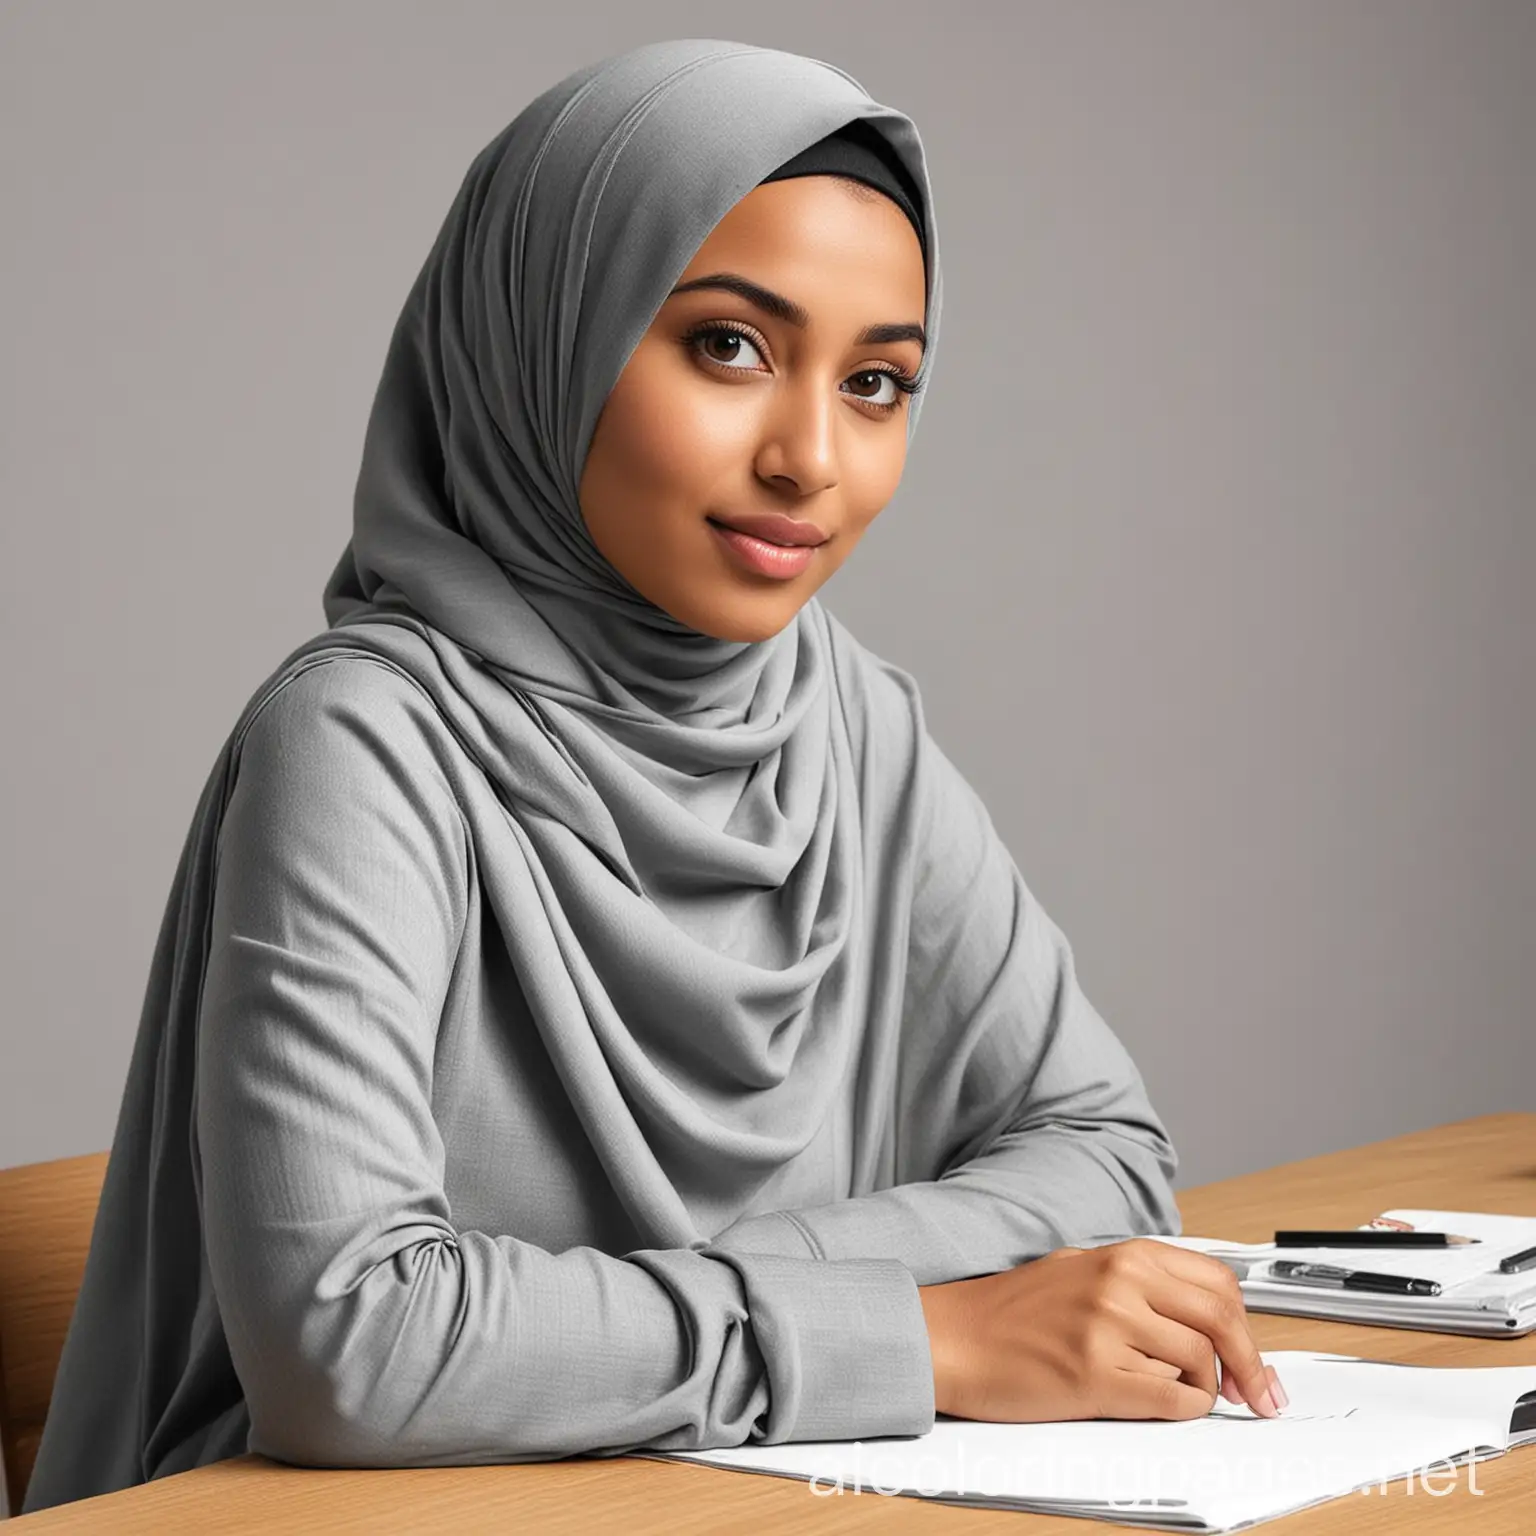 Young-Muslim-Woman-Podcasting-in-Studio-Hijab-Wearing-Podcaster